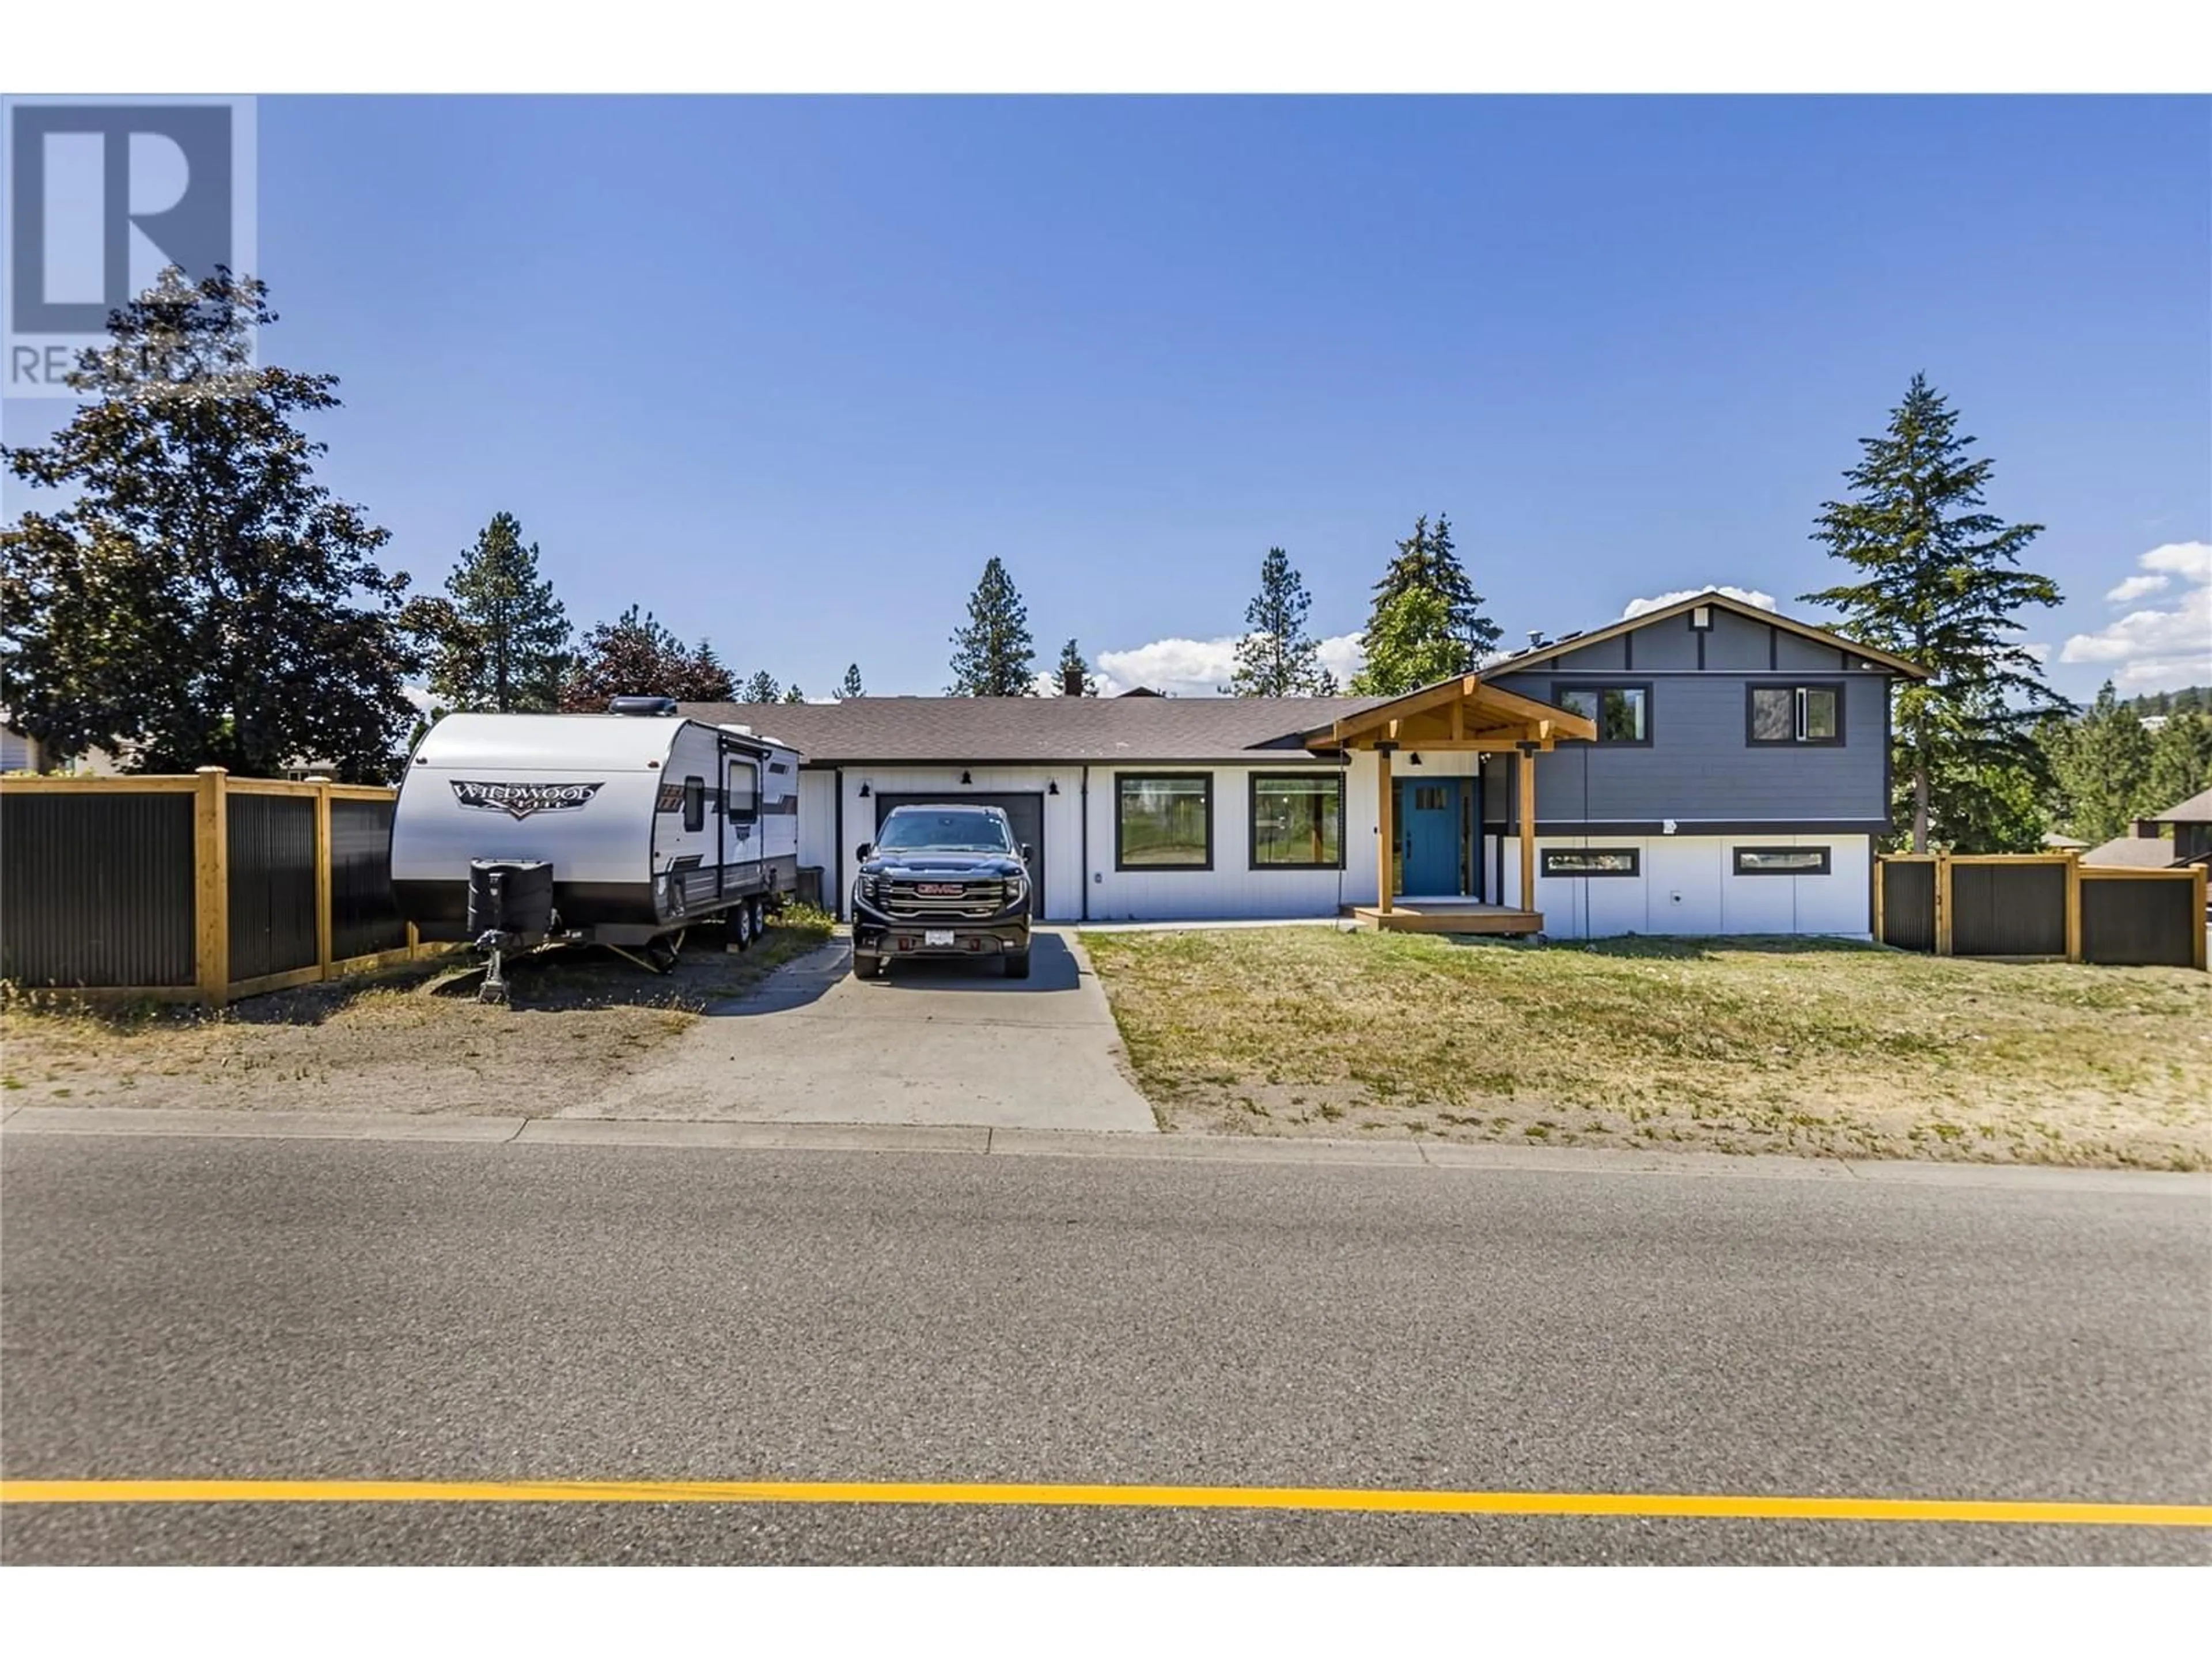 Frontside or backside of a home for 3150 Woodstock Drive, West Kelowna British Columbia V4T1S8